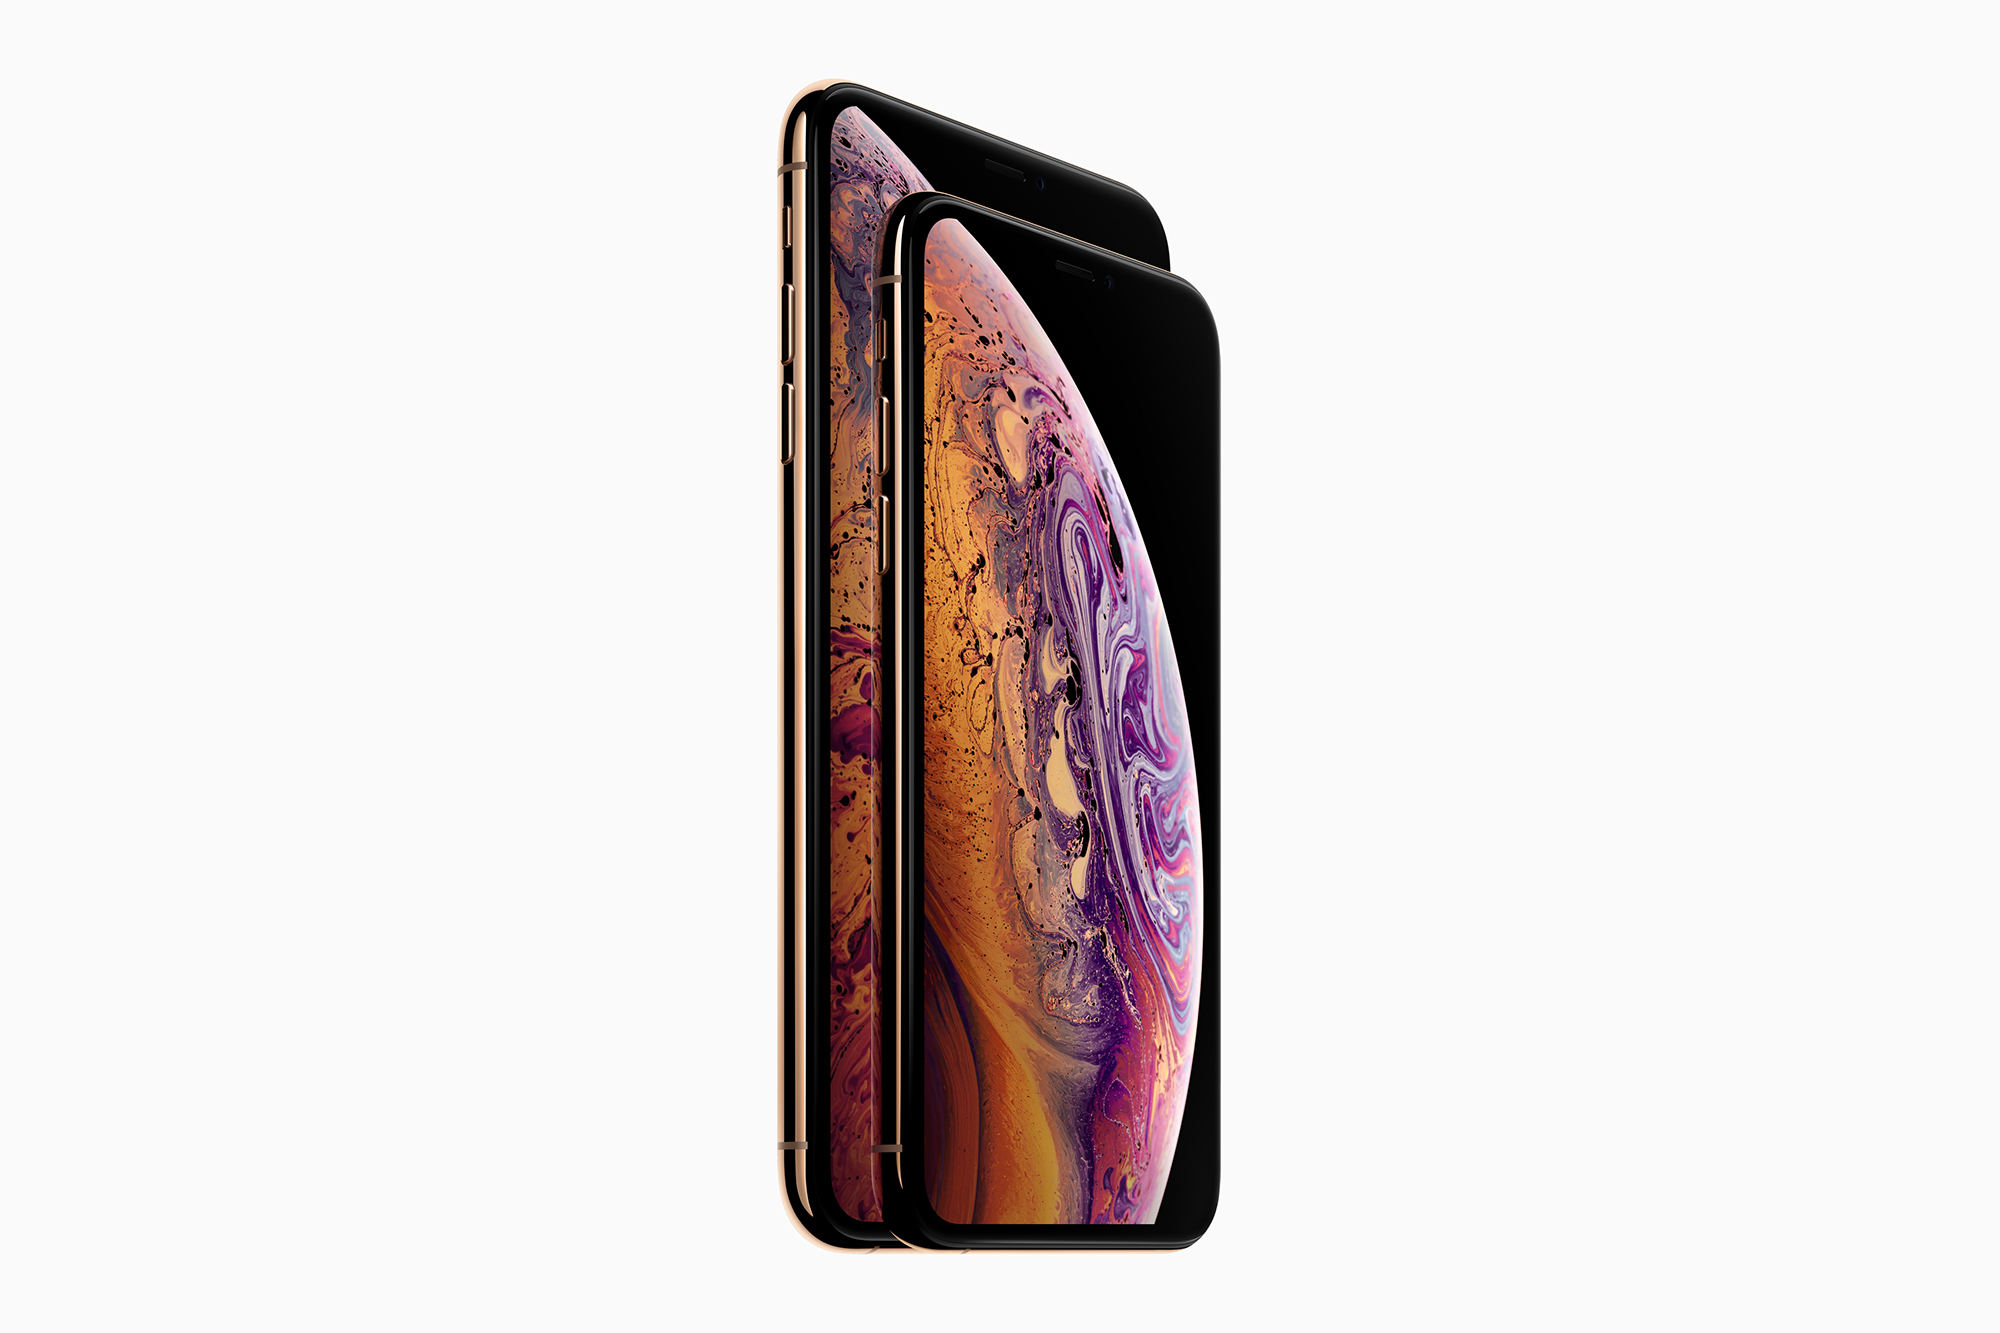 Iphone Xs Max Apple Wallpapers